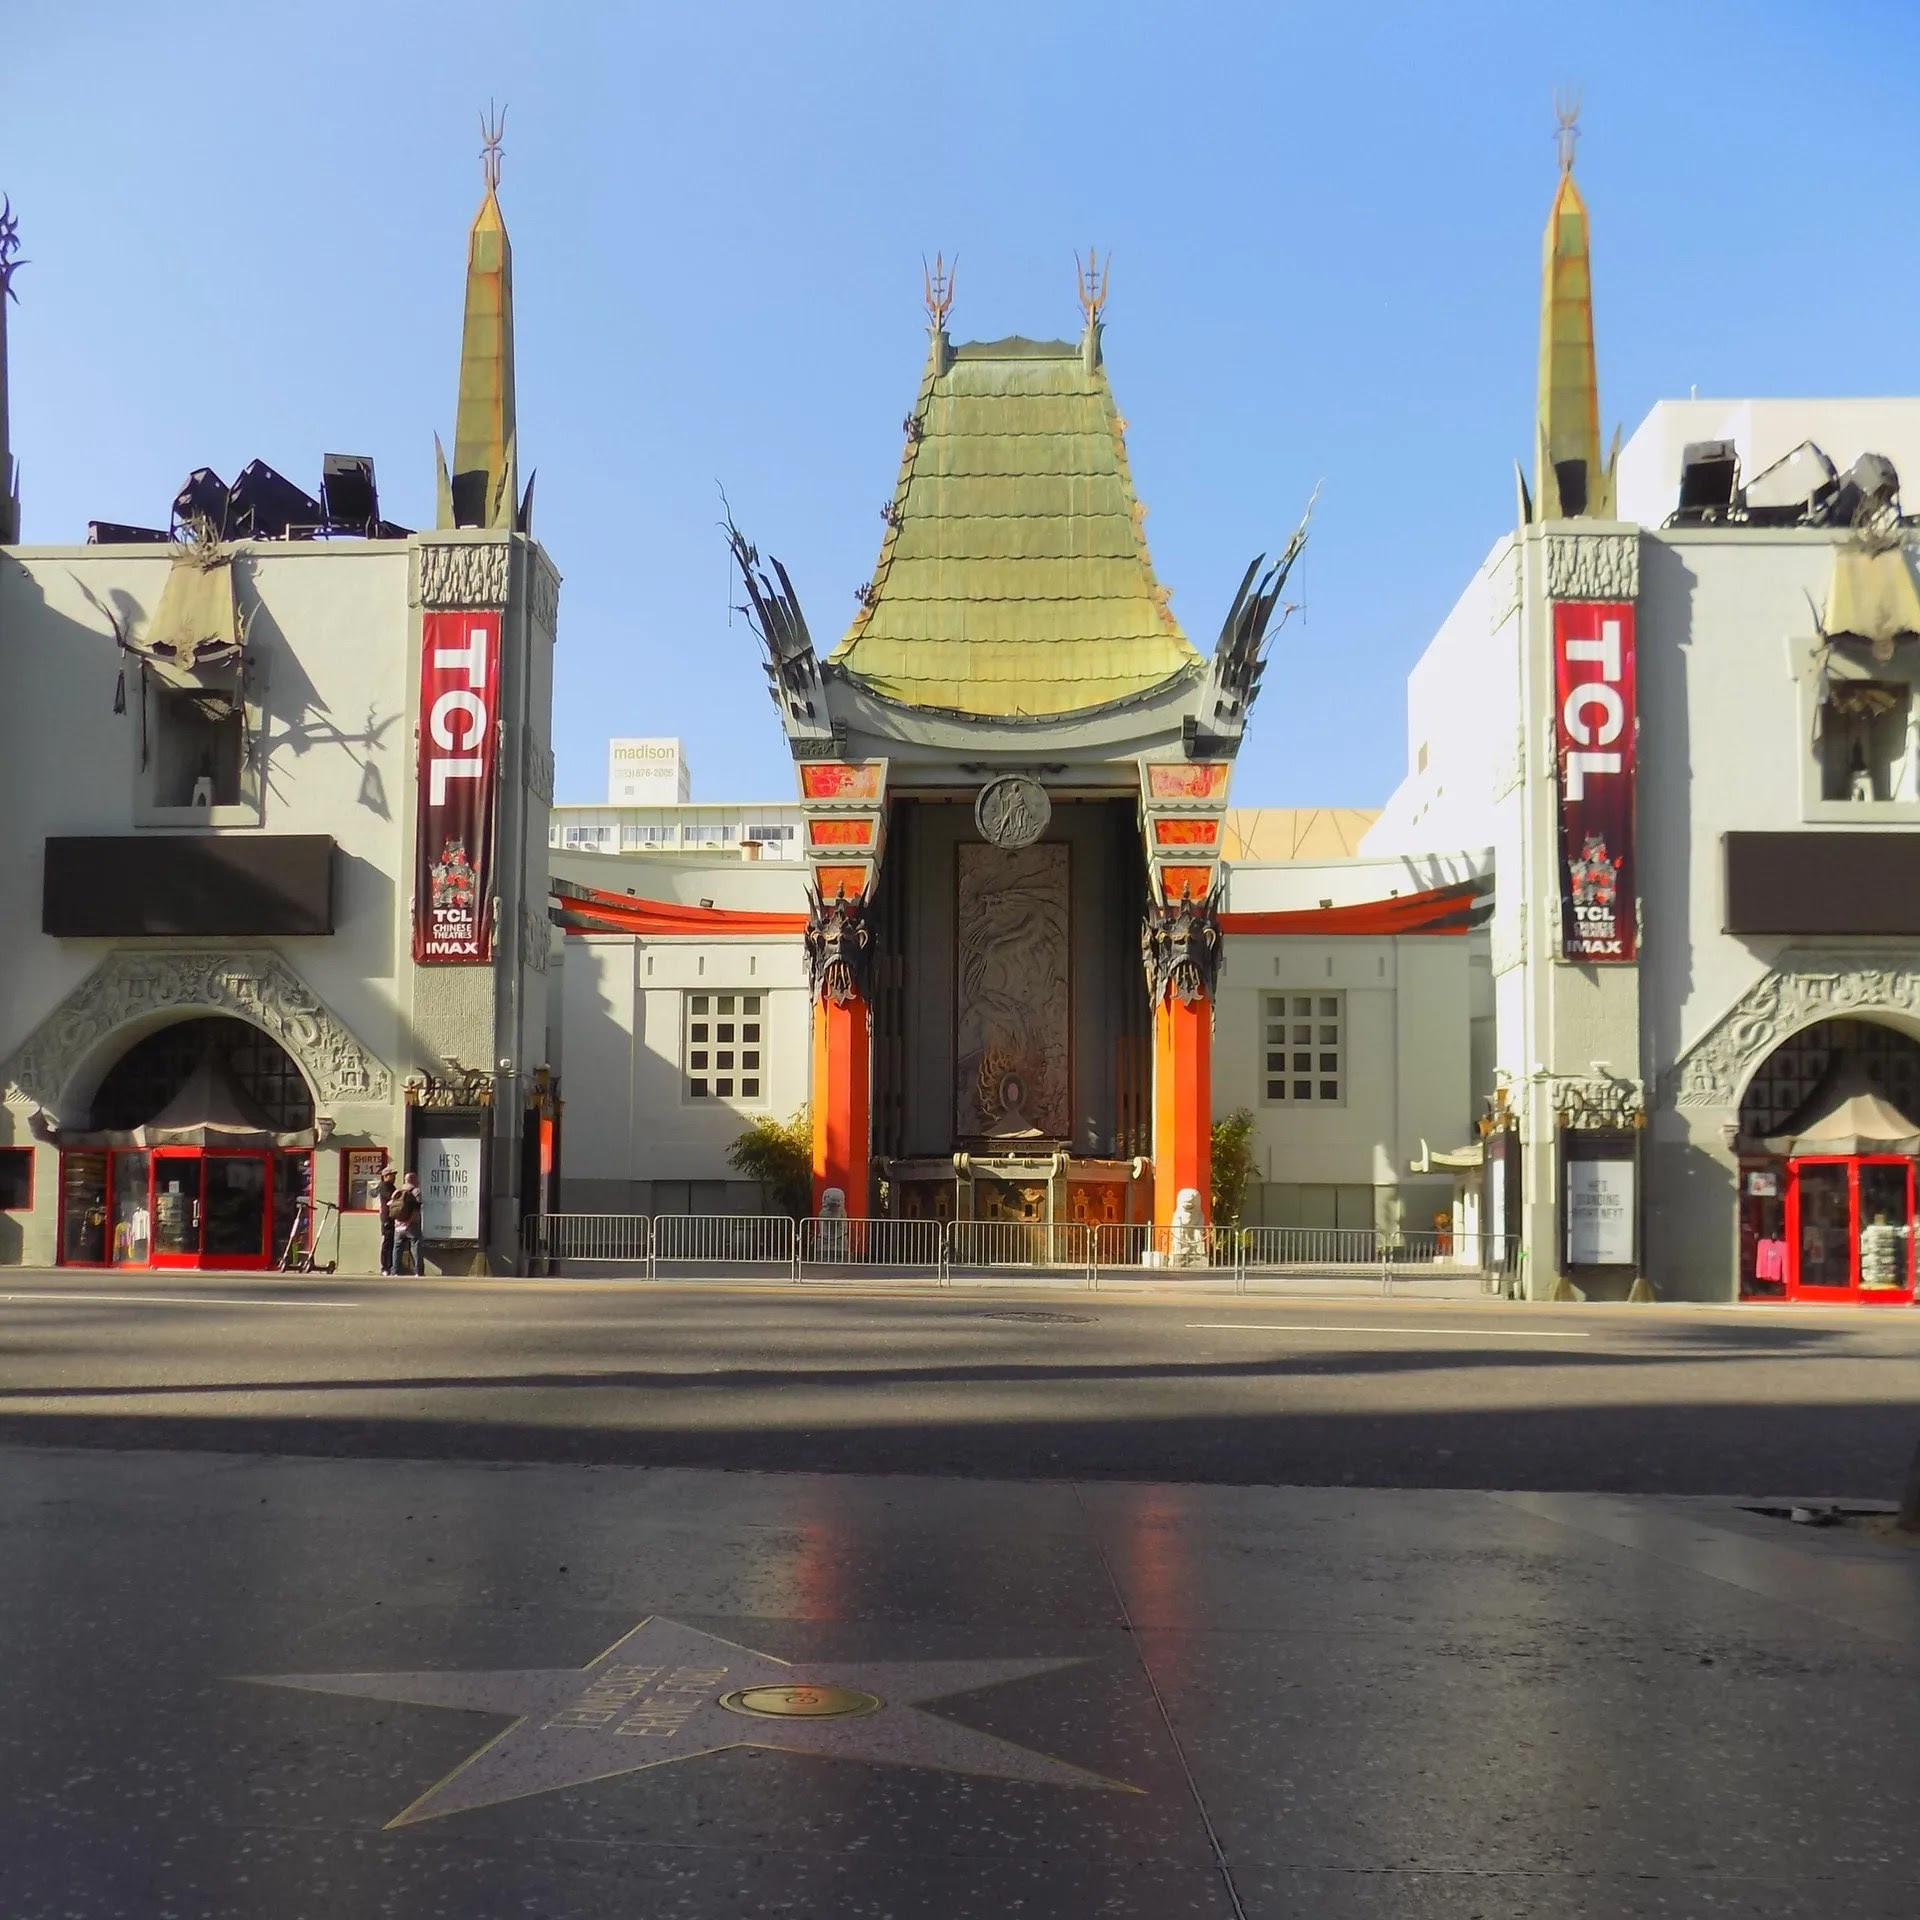 It is one of the most iconic places in los angeles. Hollywood Walk of Fame vs. Grauman’s Chinese Theatre ExperienceFirst